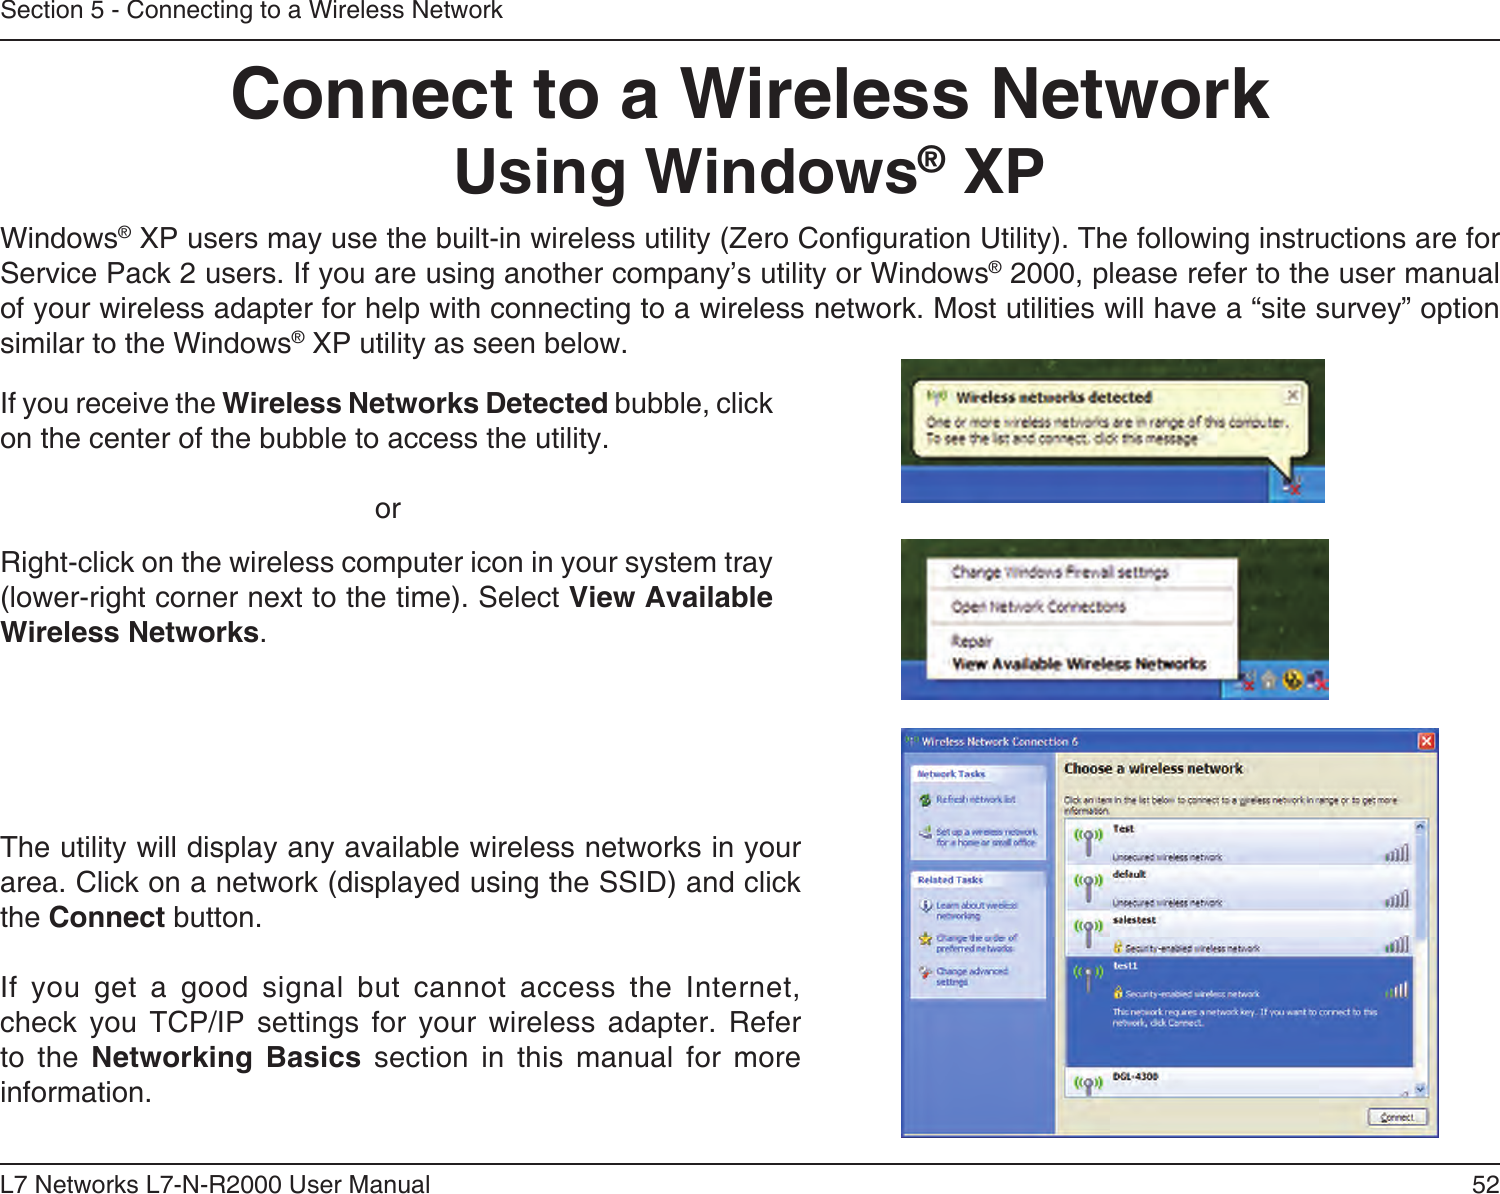 52L7 Networks L7-N-R2000 User ManualSection 5 - Connecting to a Wireless NetworkConnect to a Wireless NetworkUsing Windows® XPWindows® XP users may use the built-in wireless utility (Zero Conguration Utility). The following instructions are for Service Pack 2 users. If you are using another company’s utility or Windows® 2000, please refer to the user manual of your wireless adapter for help with connecting to a wireless network. Most utilities will have a “site survey” option similar to the Windows® XP utility as seen below.Right-click on the wireless computer icon in your system tray (lower-right corner next to the time). Select View Available Wireless Networks.If you receive the Wireless Networks Detected bubble, click on the center of the bubble to access the utility.     orThe utility will display any available wireless networks in your area. Click on a network (displayed using the SSID) and click the Connect button.If  you  get  a  good  signal  but  cannot  access  the  Internet, check  you  TCP/IP  settings  for  your  wireless  adapter.  Refer to  the  Networking  Basics  section  in  this  manual  for  more information.